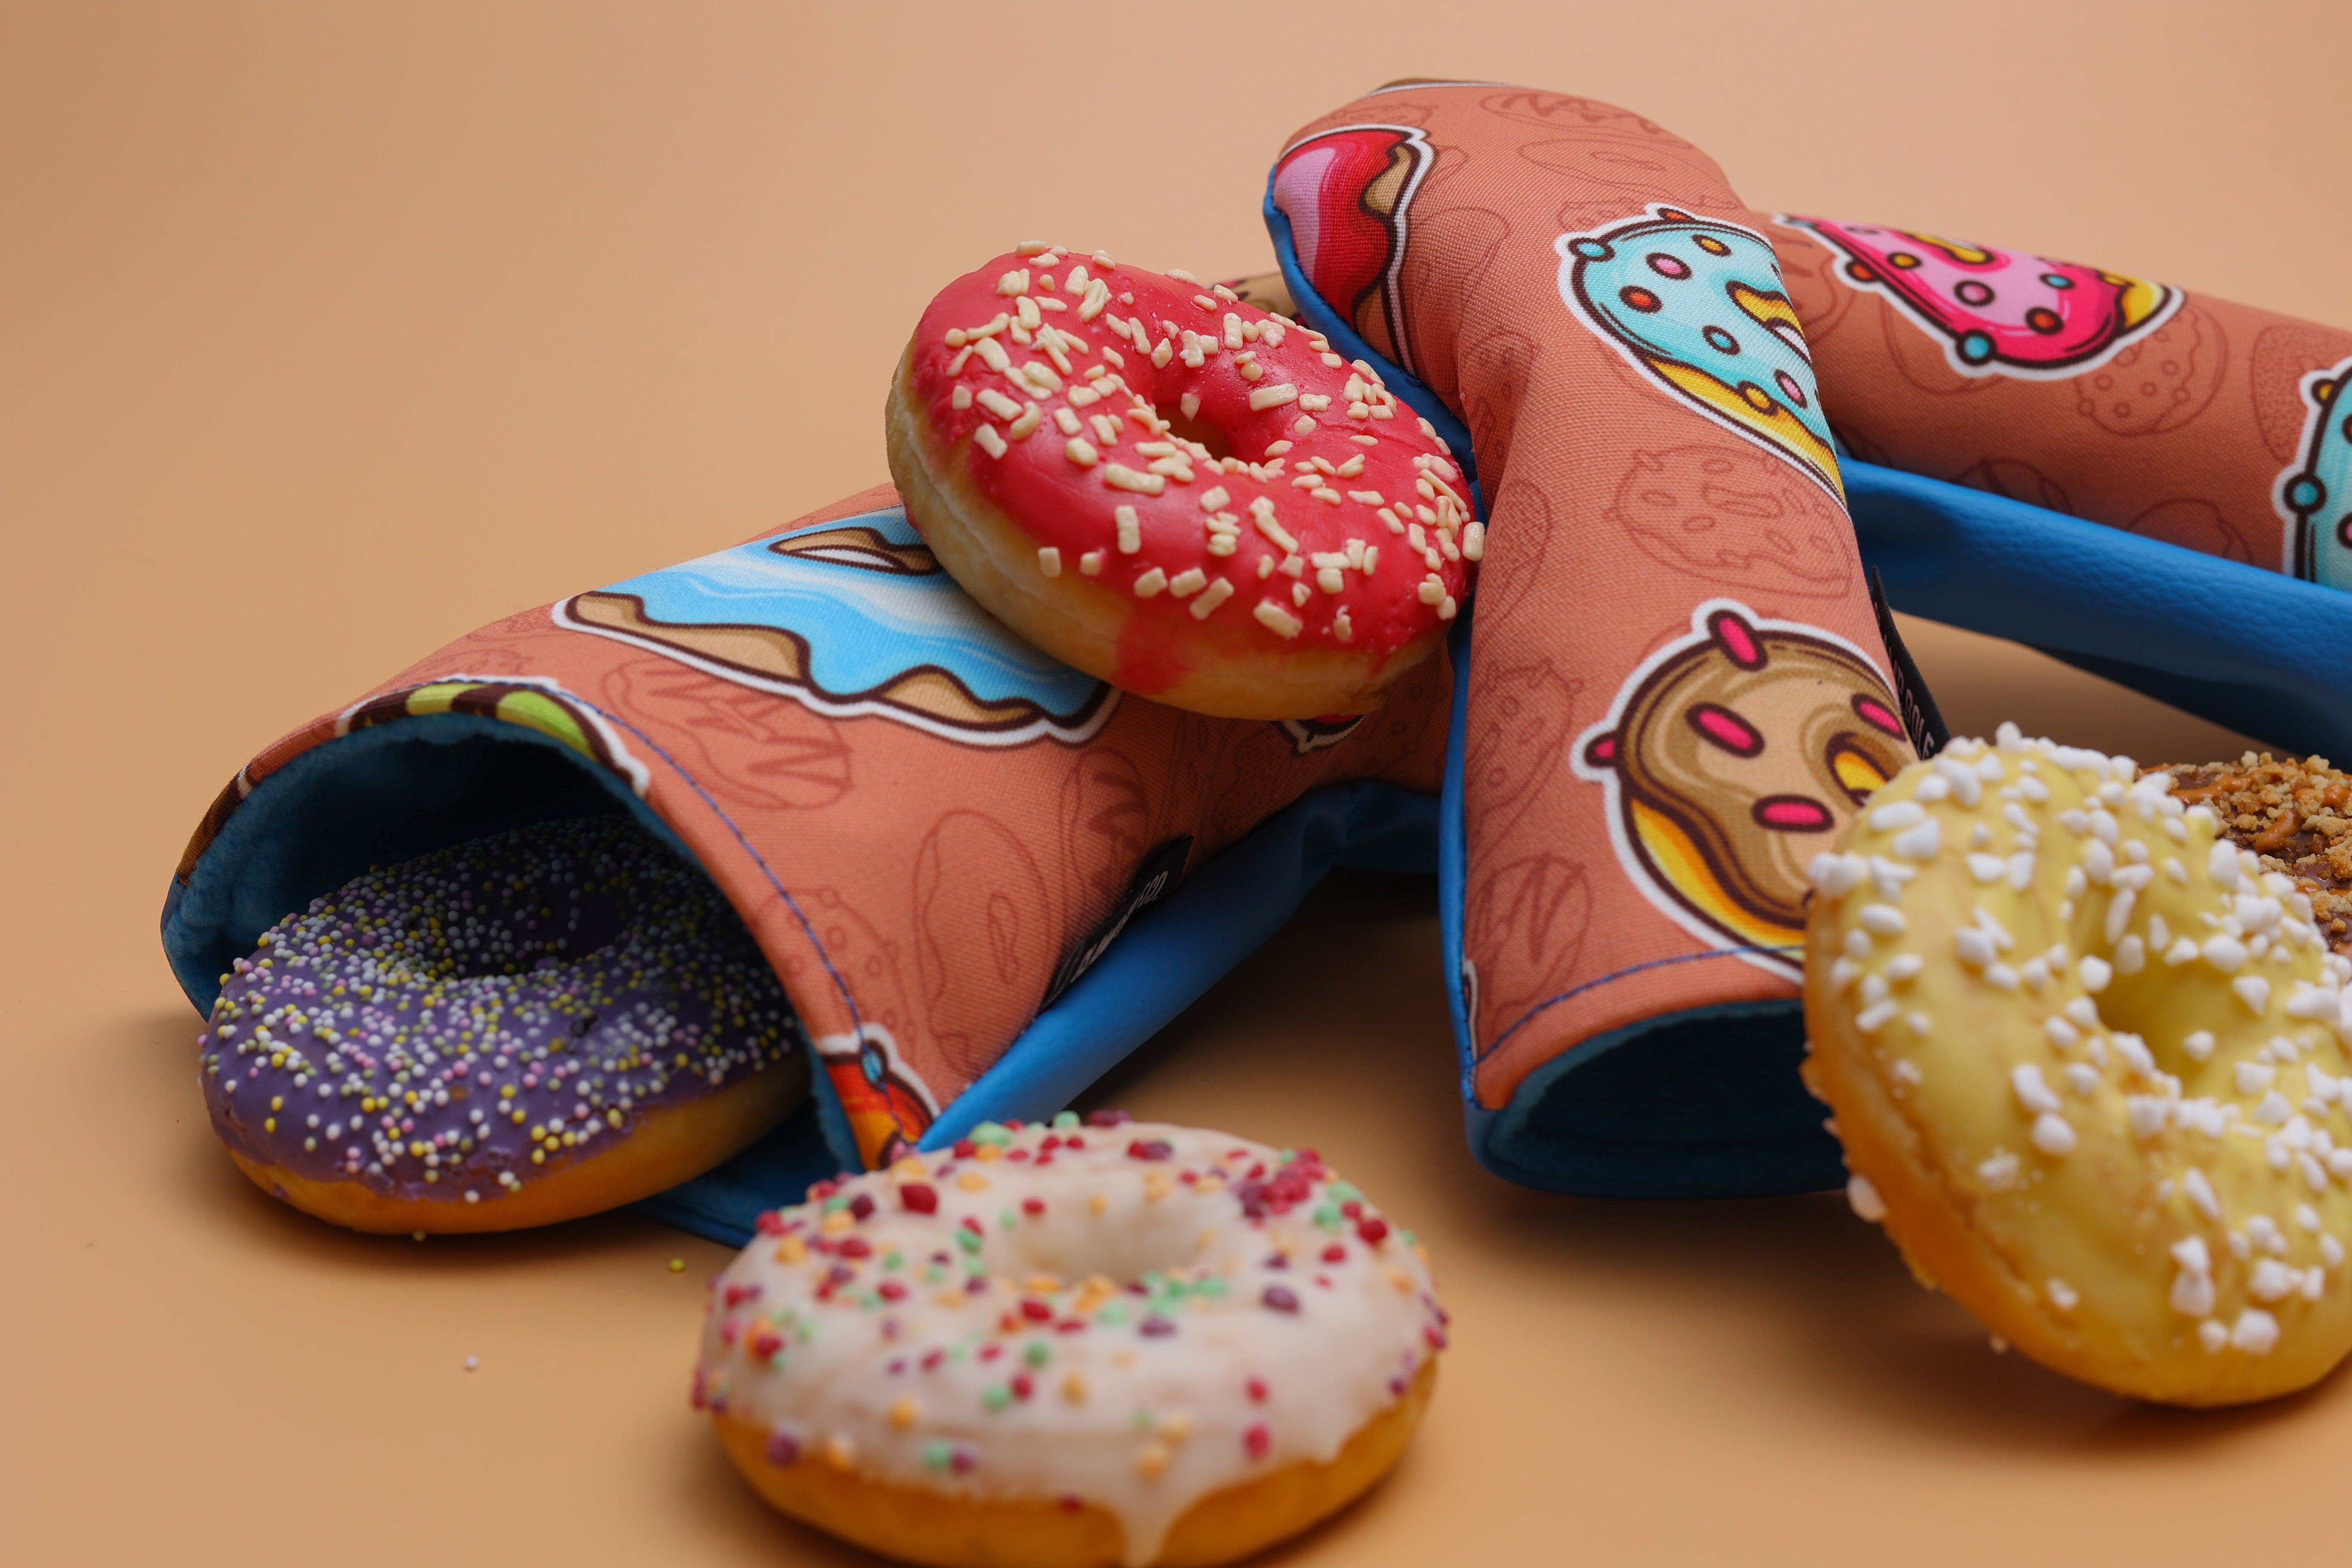 Donut style headcovers